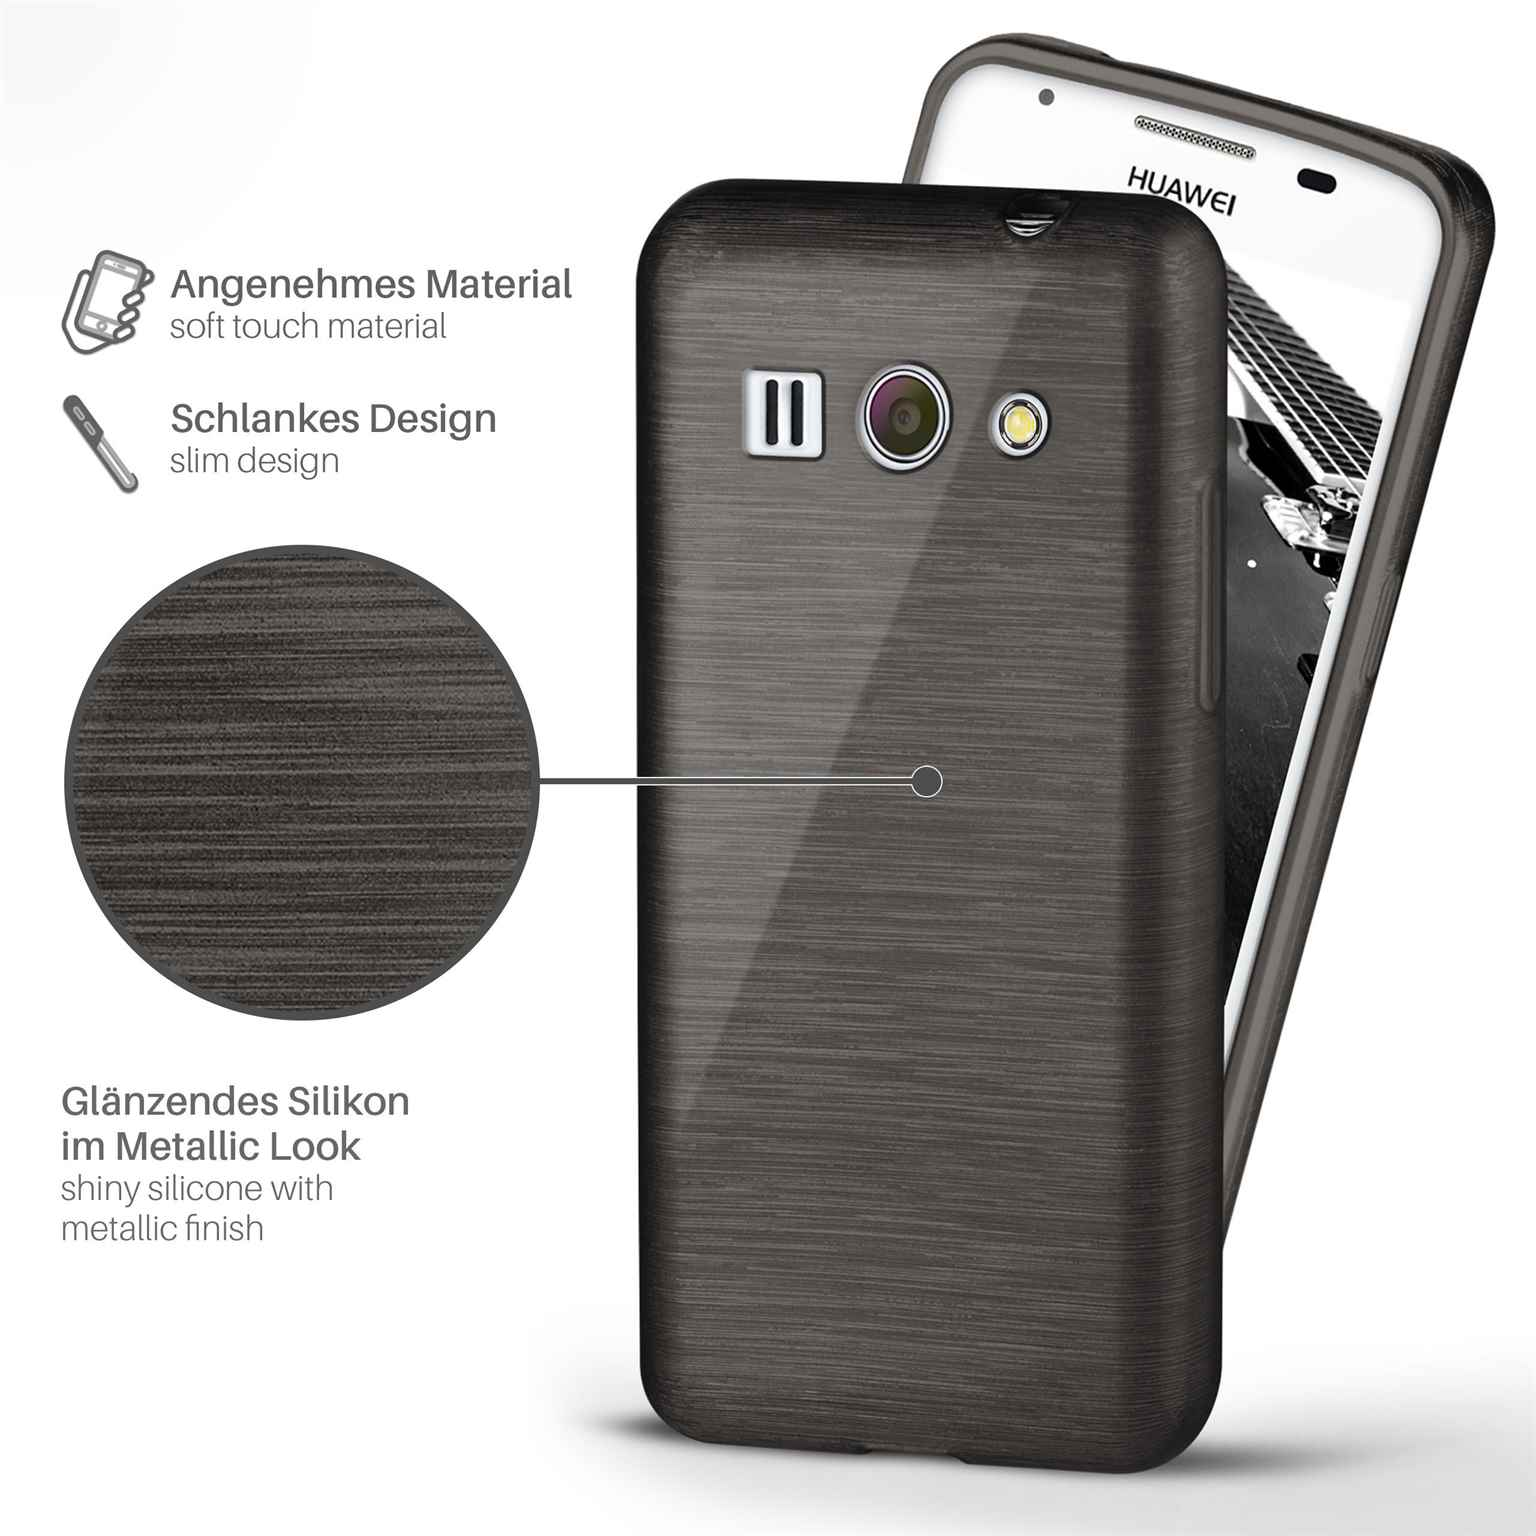 Case, MOEX Ascend Backcover, Onyx-Black Brushed Huawei, G520,